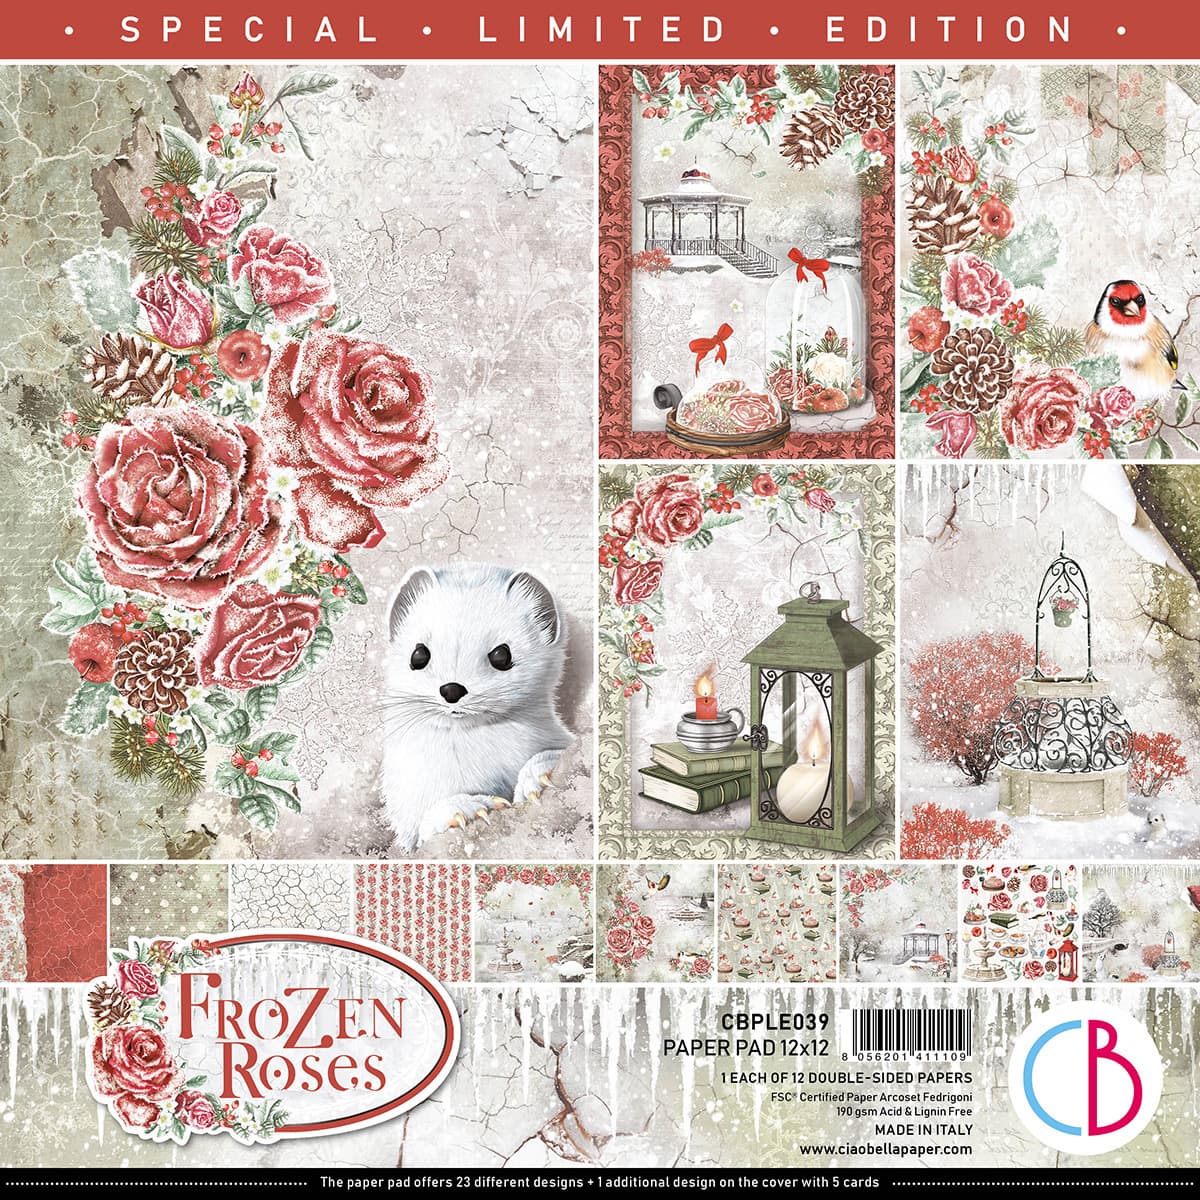 FROZEN ROSES LIMITED EDITION PAPER PAD 12"X12" 12/PKG